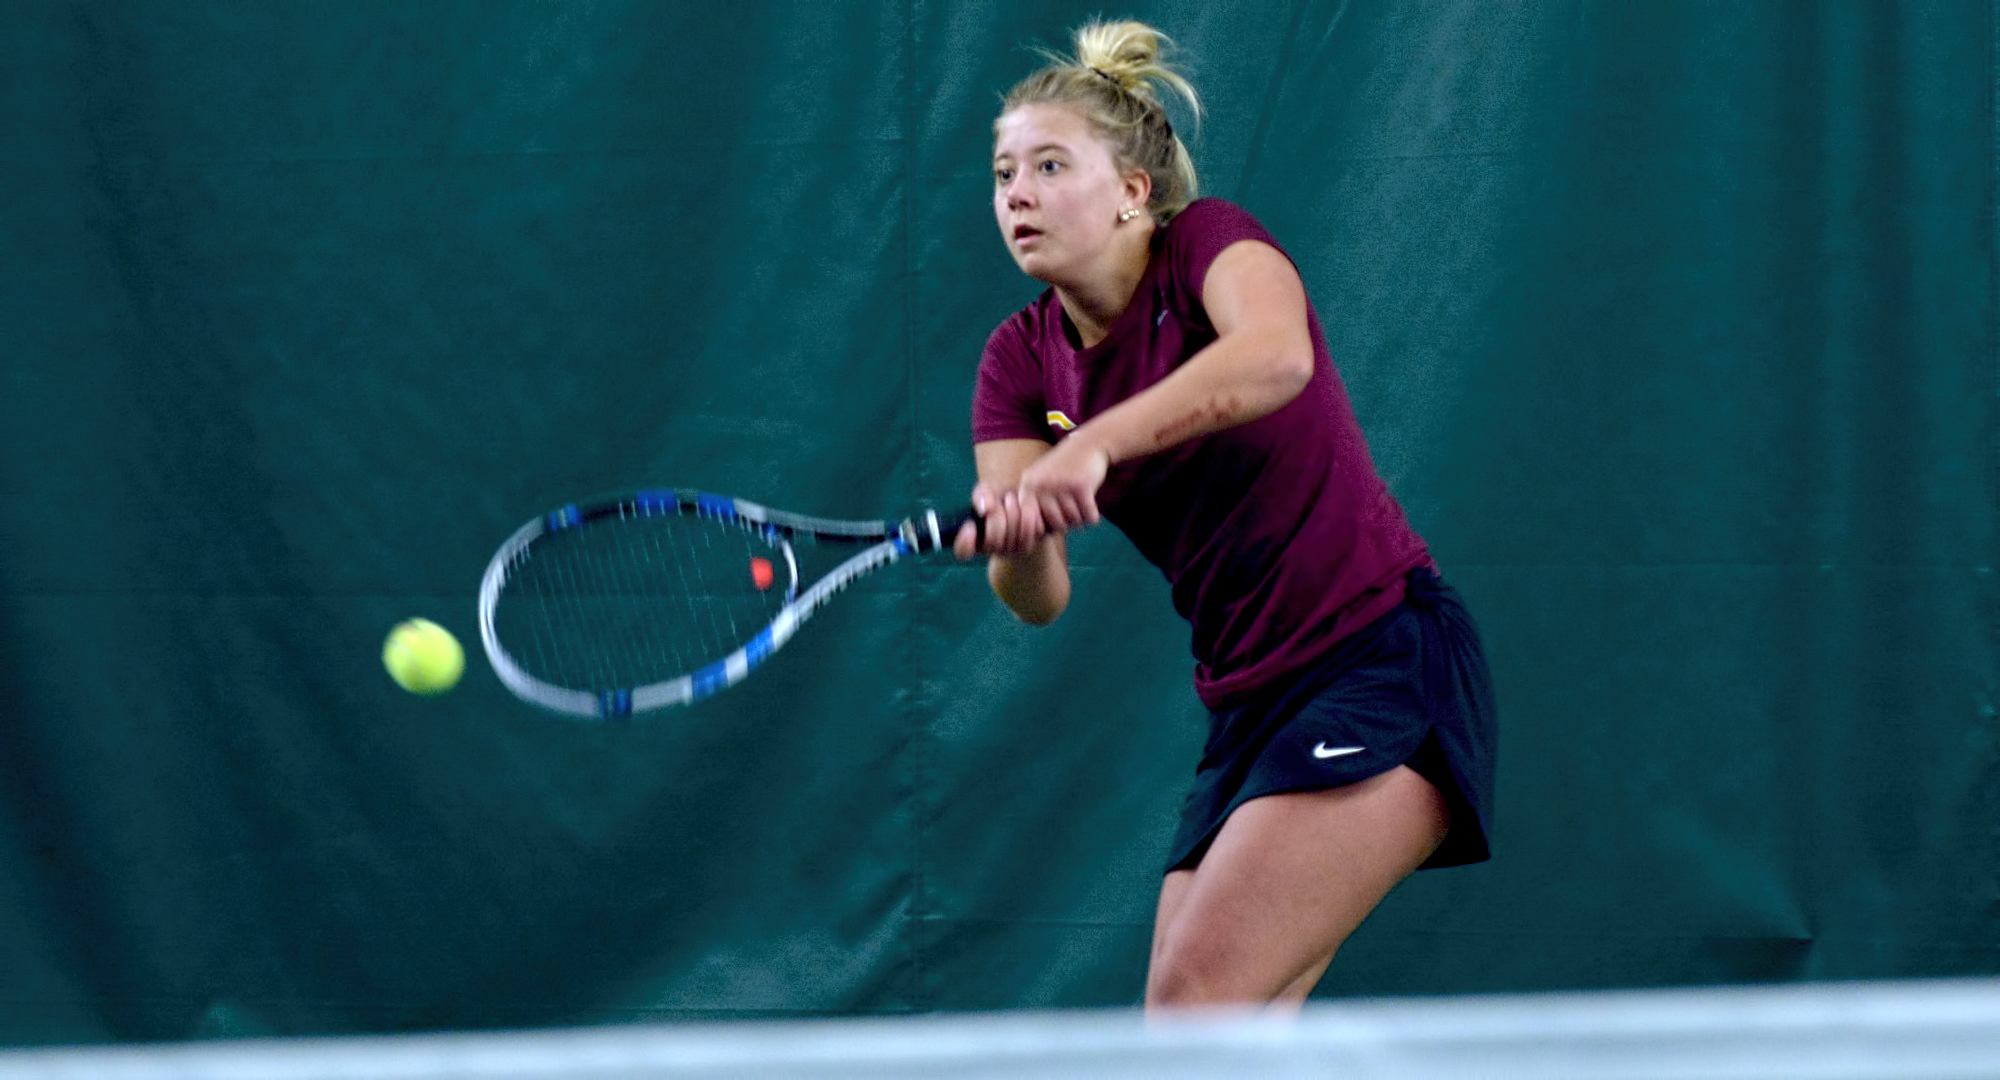 Freshman Josie Beachy hits a backhand return of serve during her match at No.5 singles during the Cobbers' match with St. Mary's.